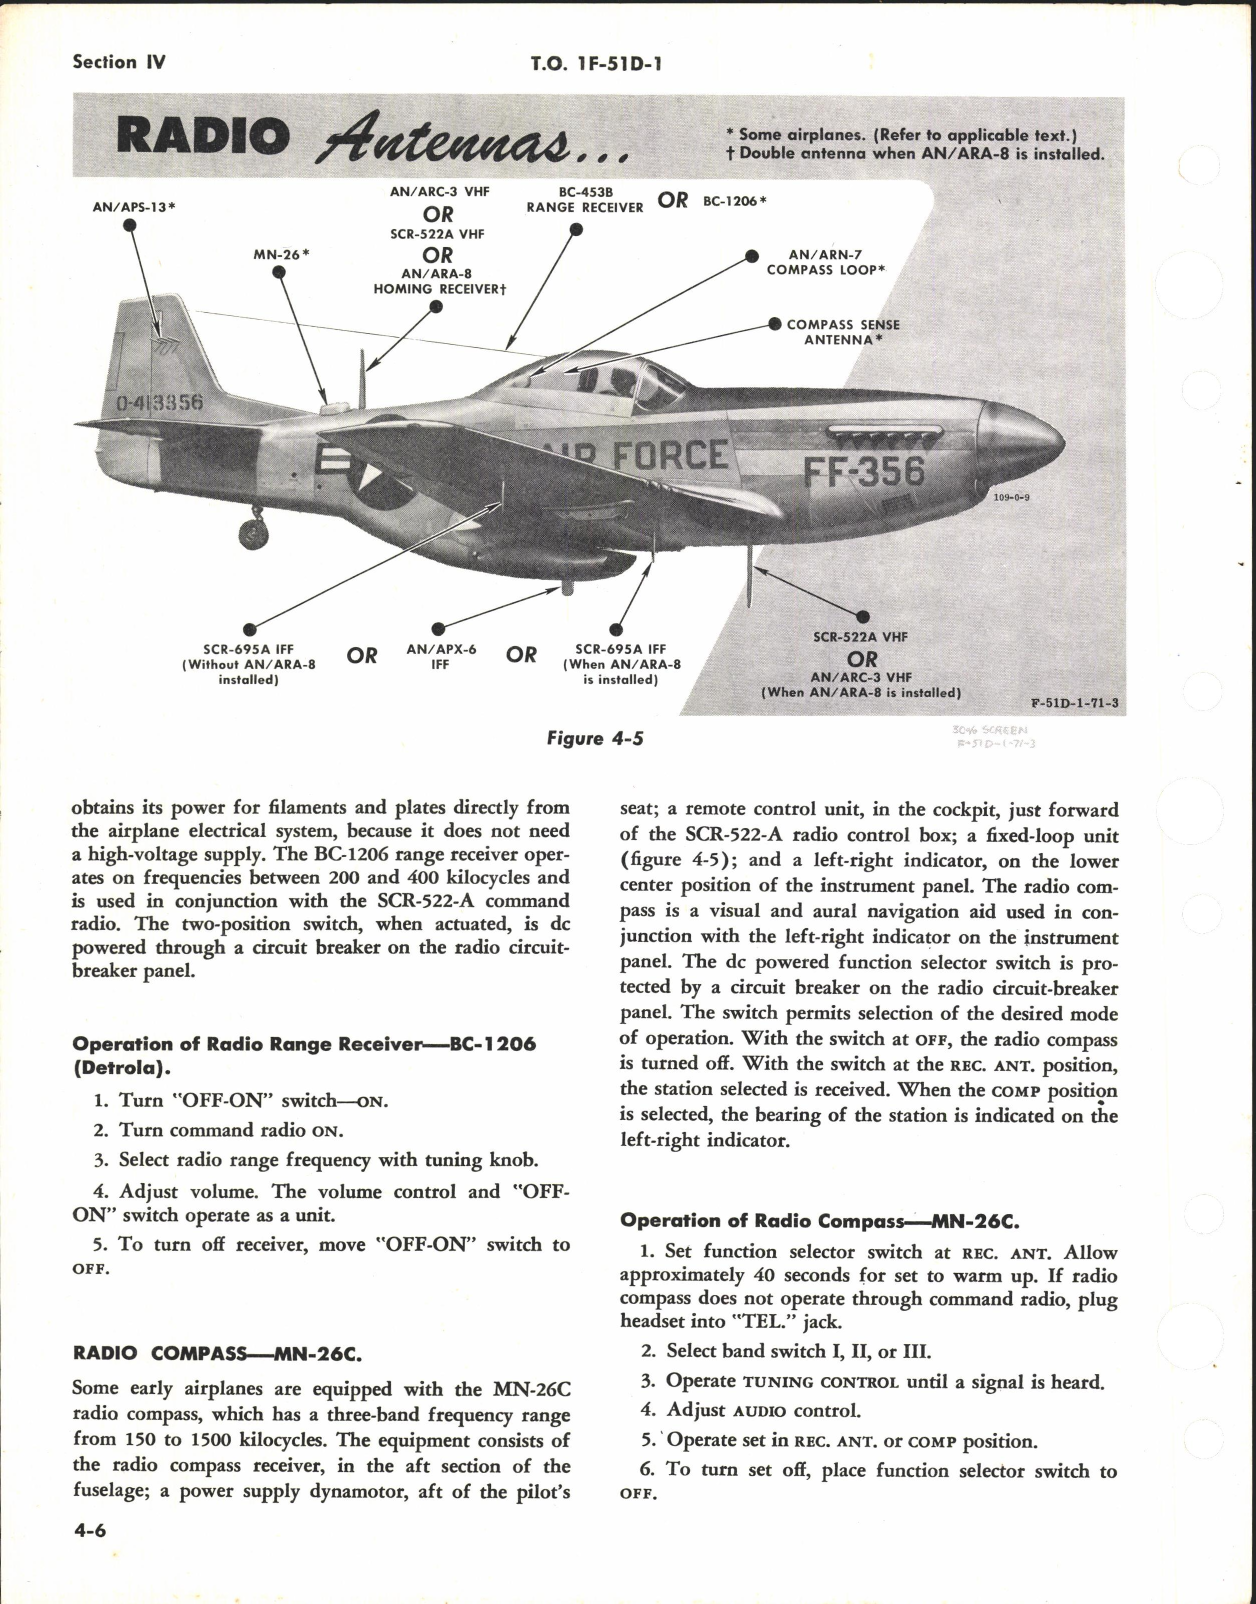 Sample page 6 from AirCorps Library document: Pilot's Flight Instructions for F-51D